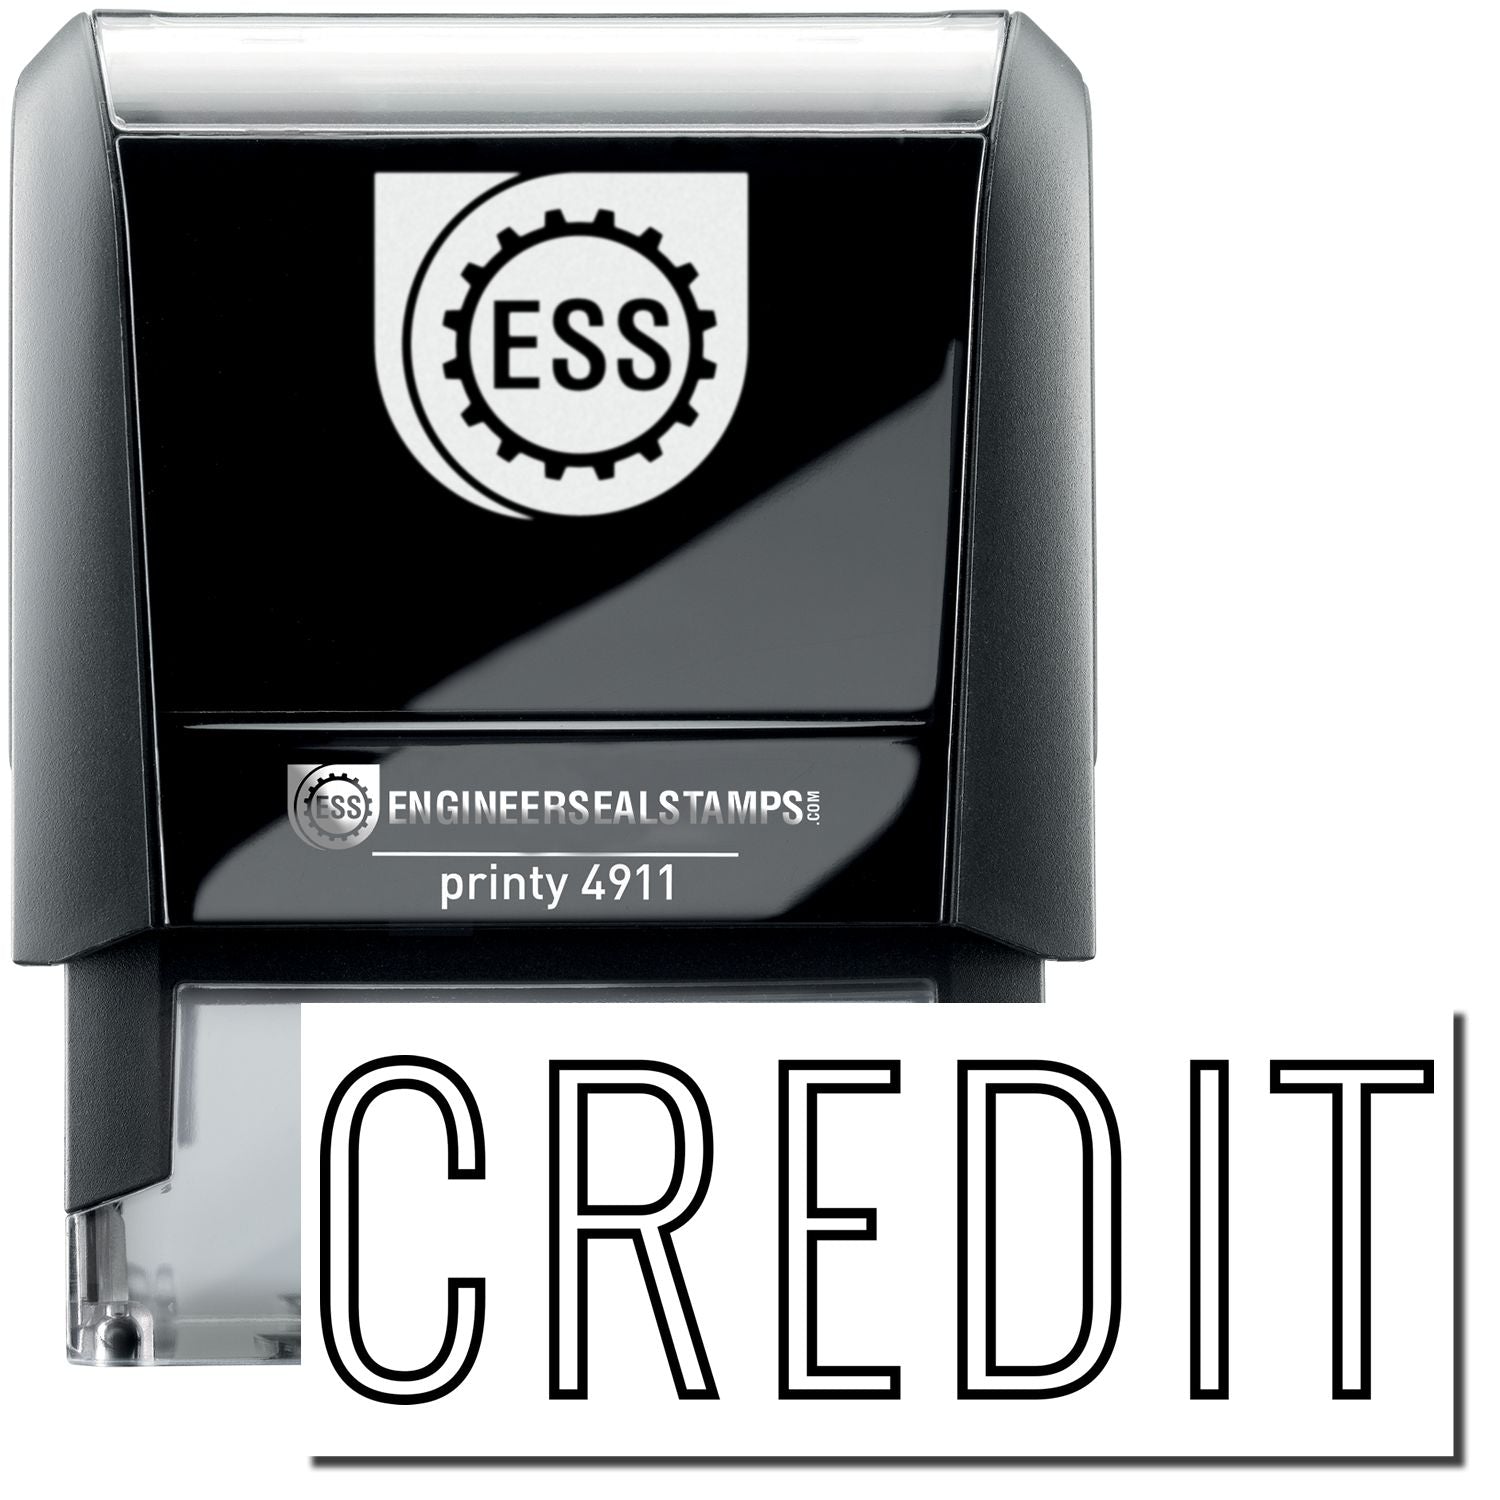 A self-inking stamp with a stamped image showing how the text "CREDIT" in an outline style is displayed after stamping.